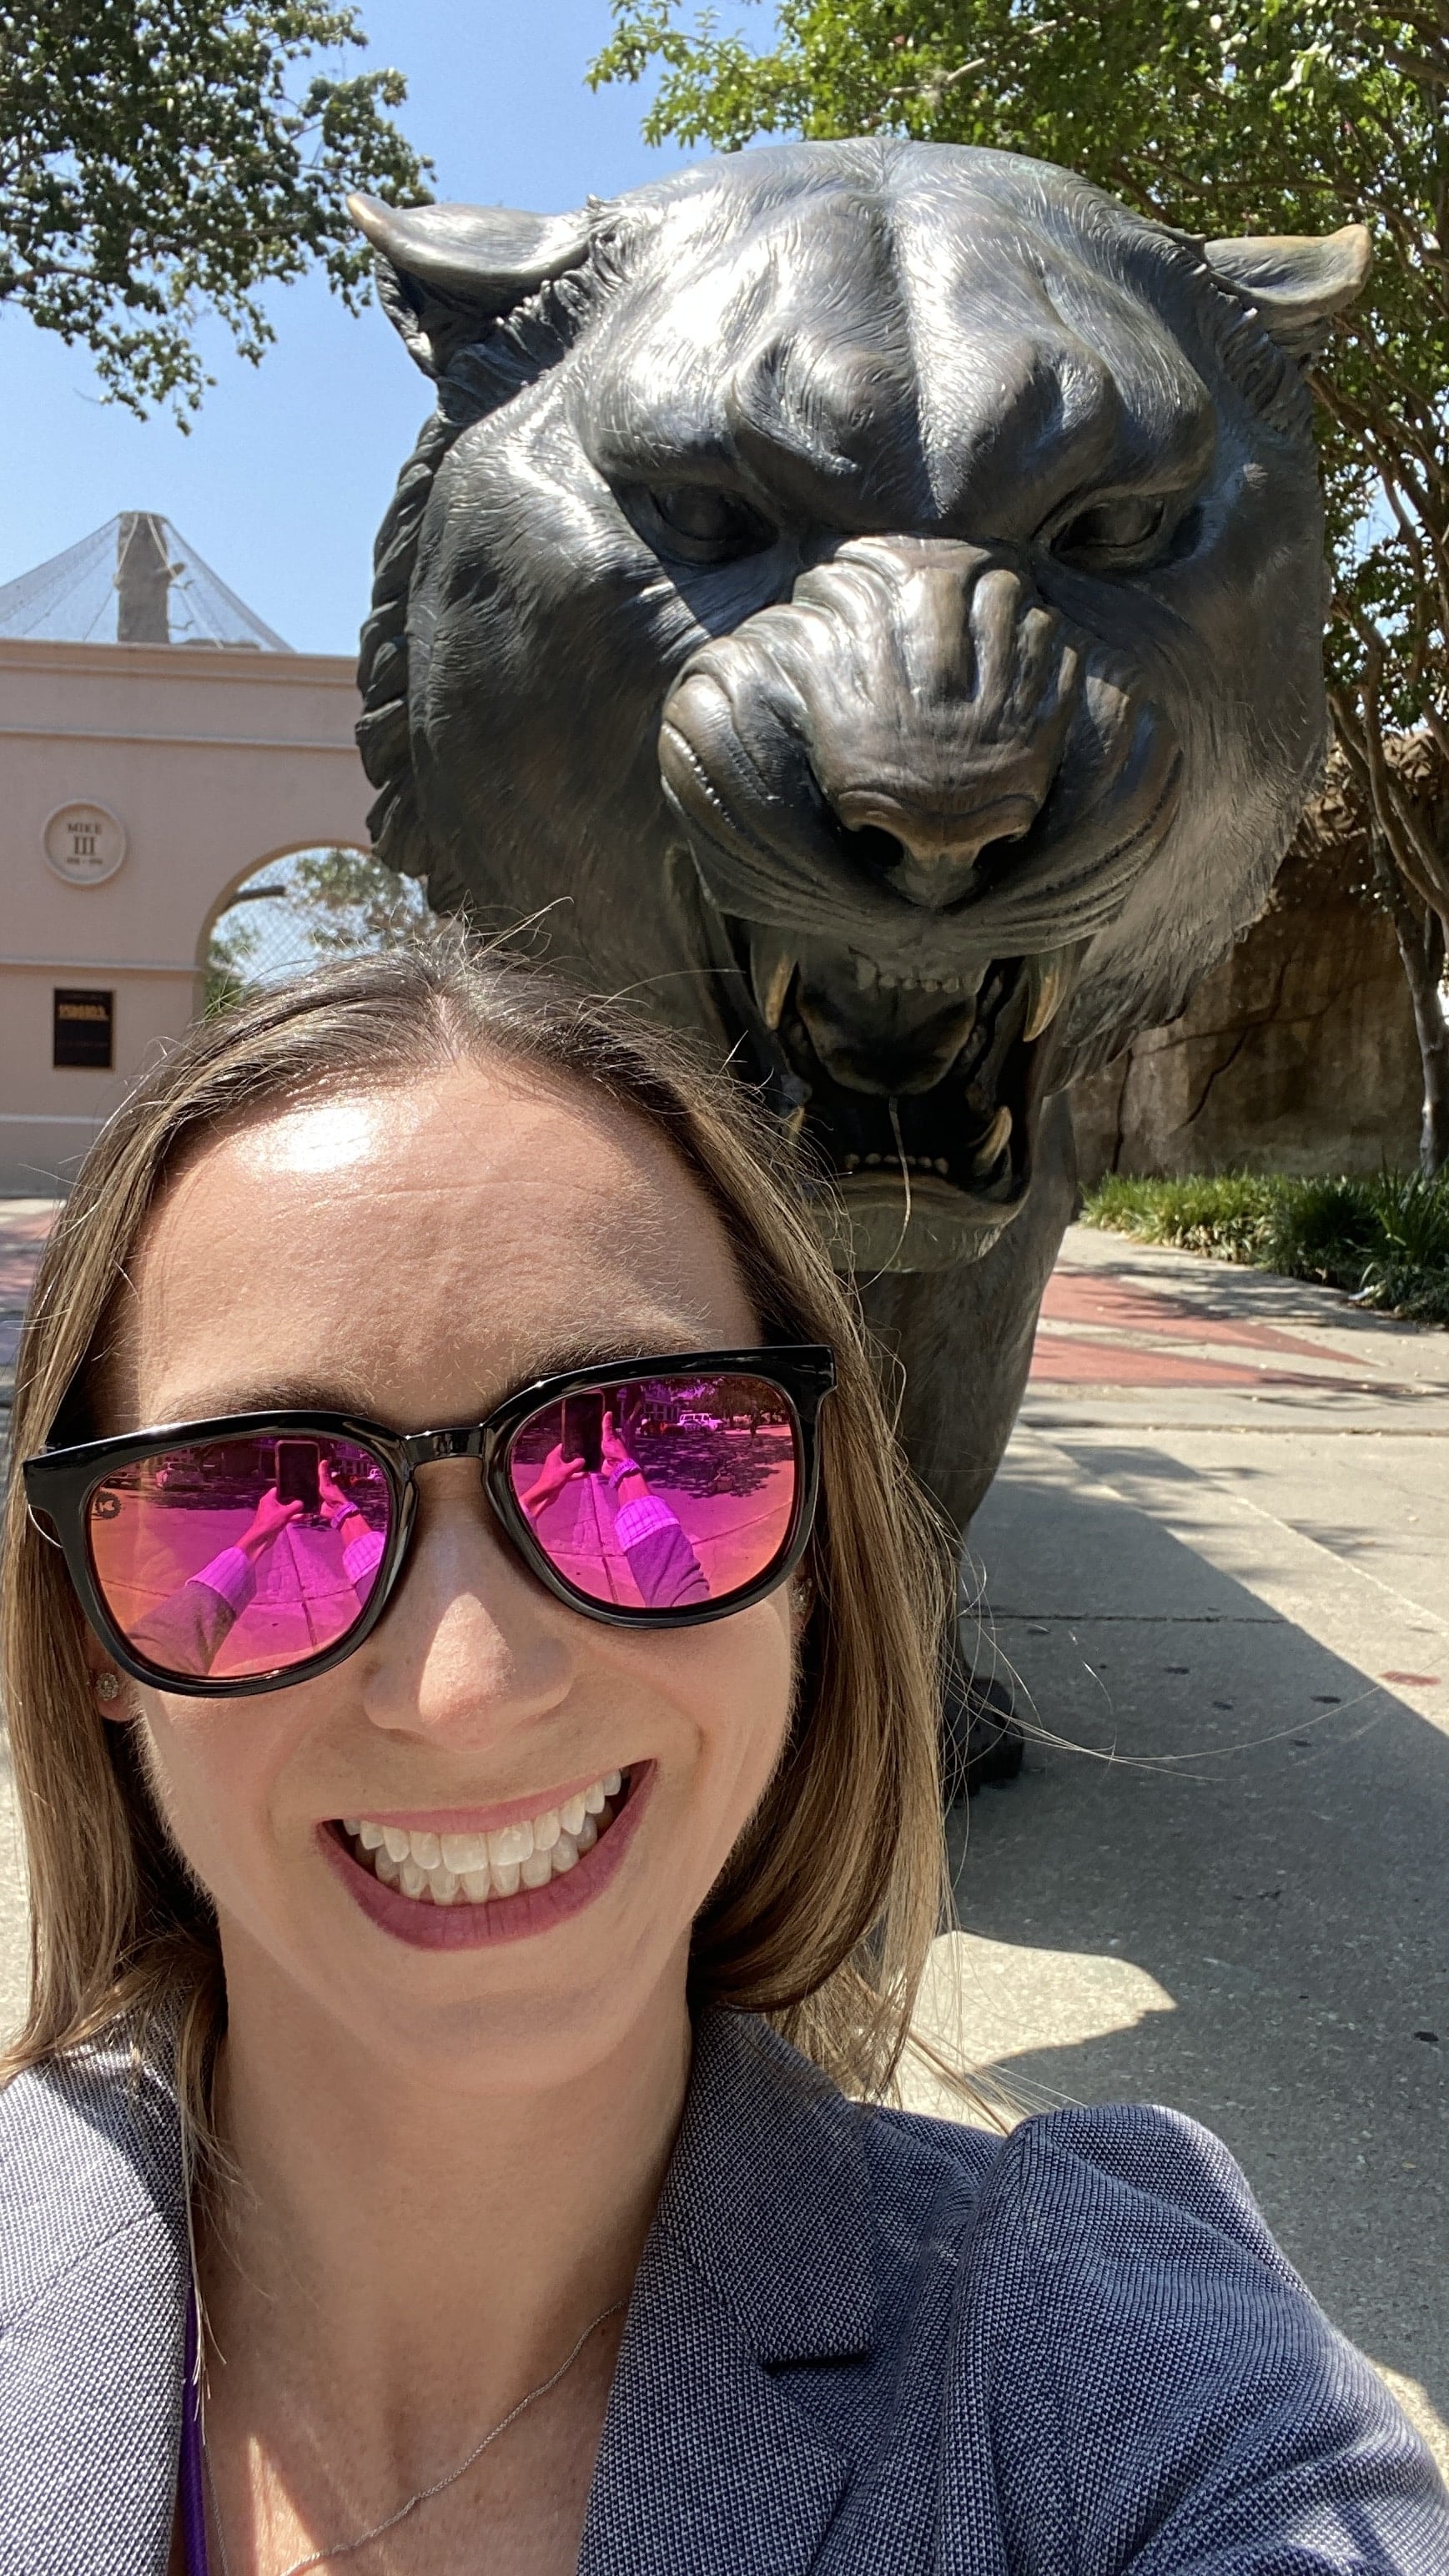 Emily Dare, PhD with Mike the Tiger Statue